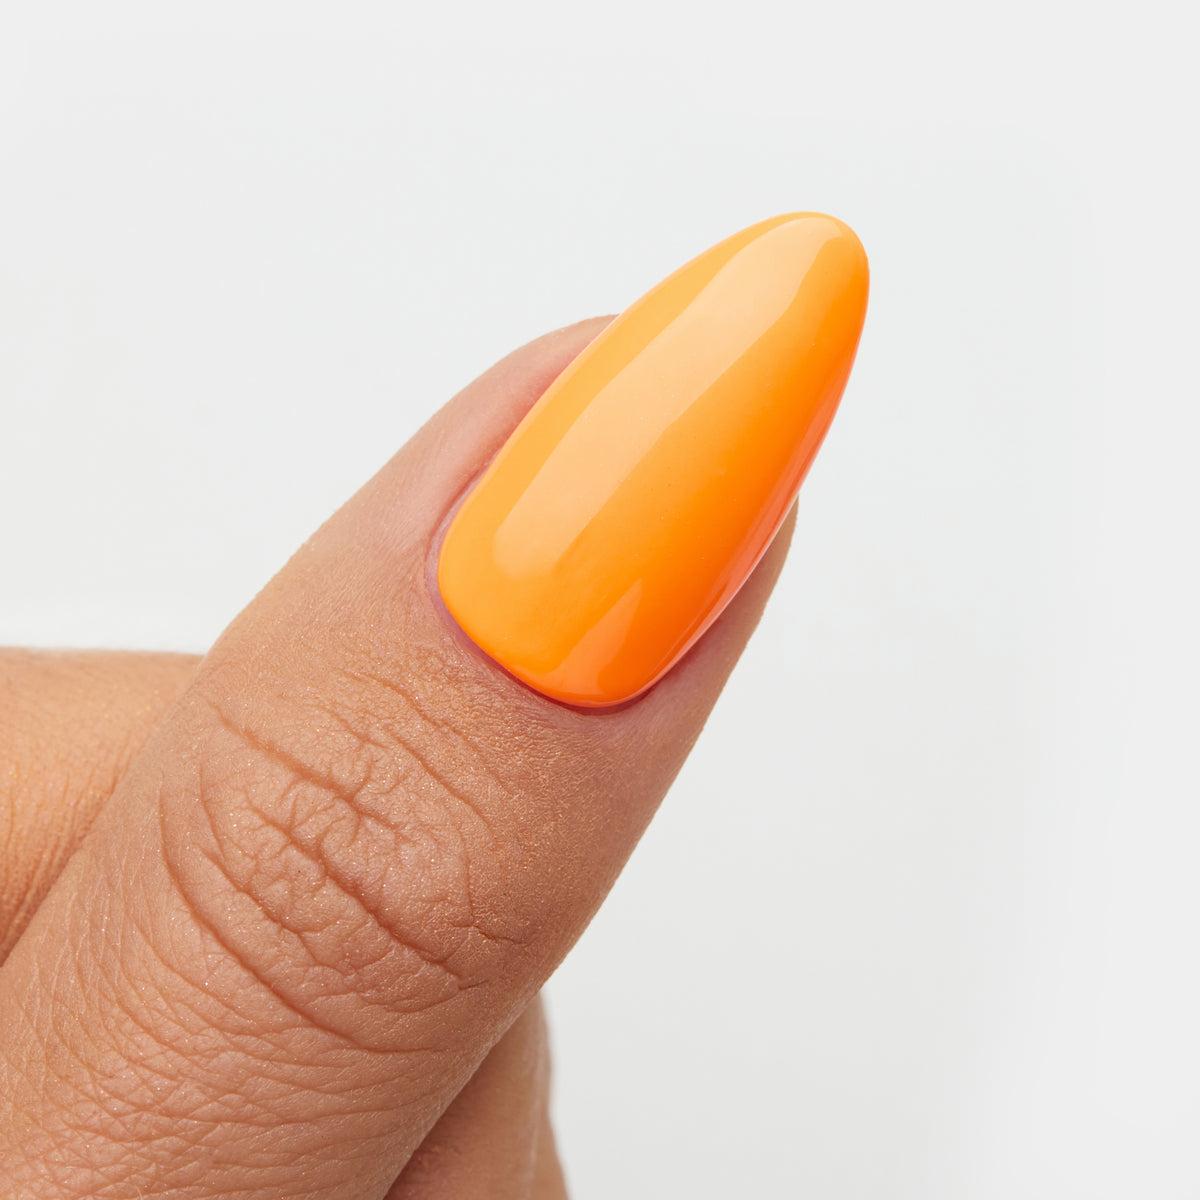 Gelous Bahama Mama gel nail polish swatch - photographed in New Zealand